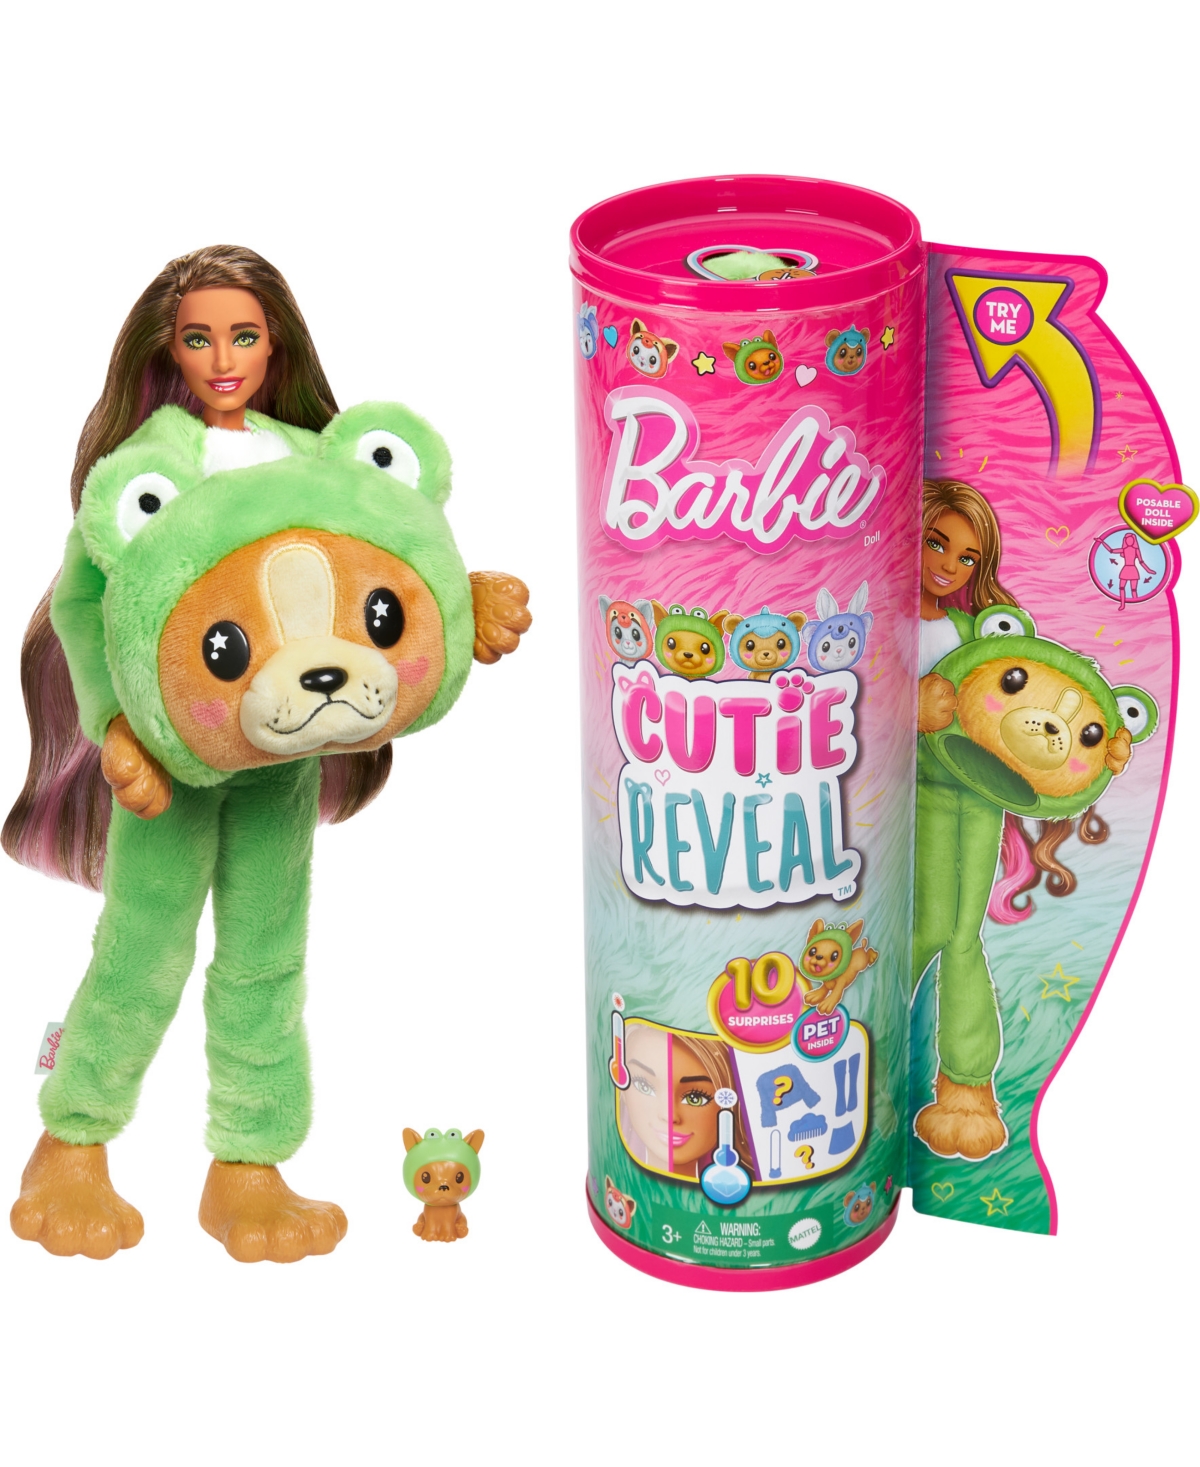 Barbie Cutie Reveal Costume-themed Series Doll And Accessories With 10 Surprises, Puppy As Frog In Multi